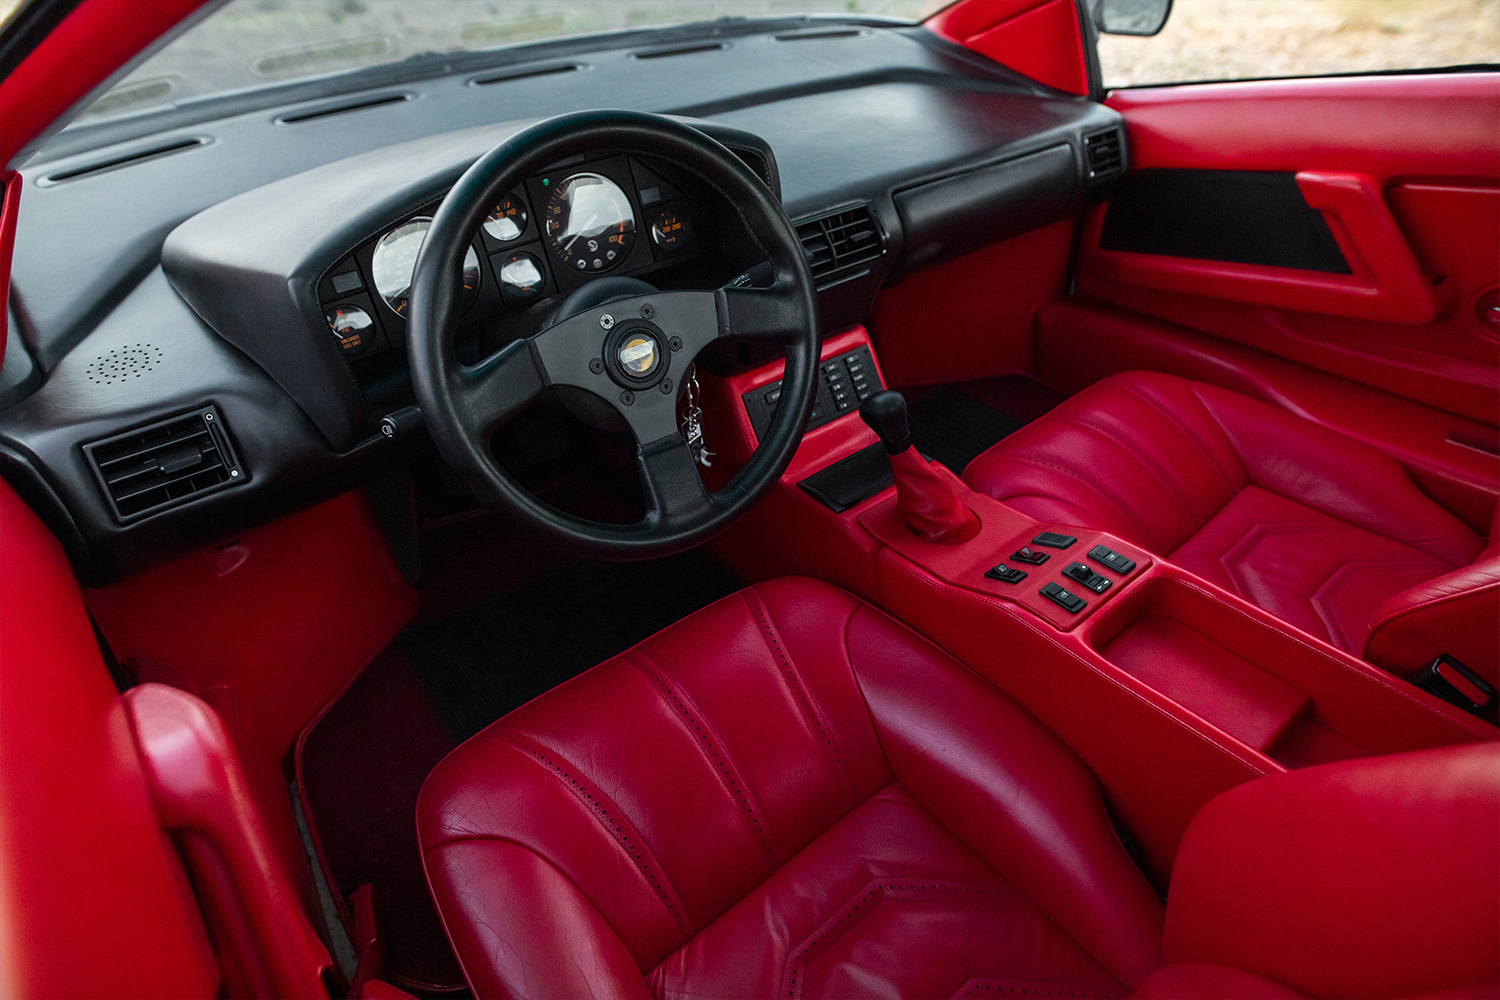 The red leather interior of the 1988 Cizeta-Moroder V16T built by Claudio Zampolli and owned by Giorgio Moroder. It's heading to auction at RM Sotheby's in 2022.